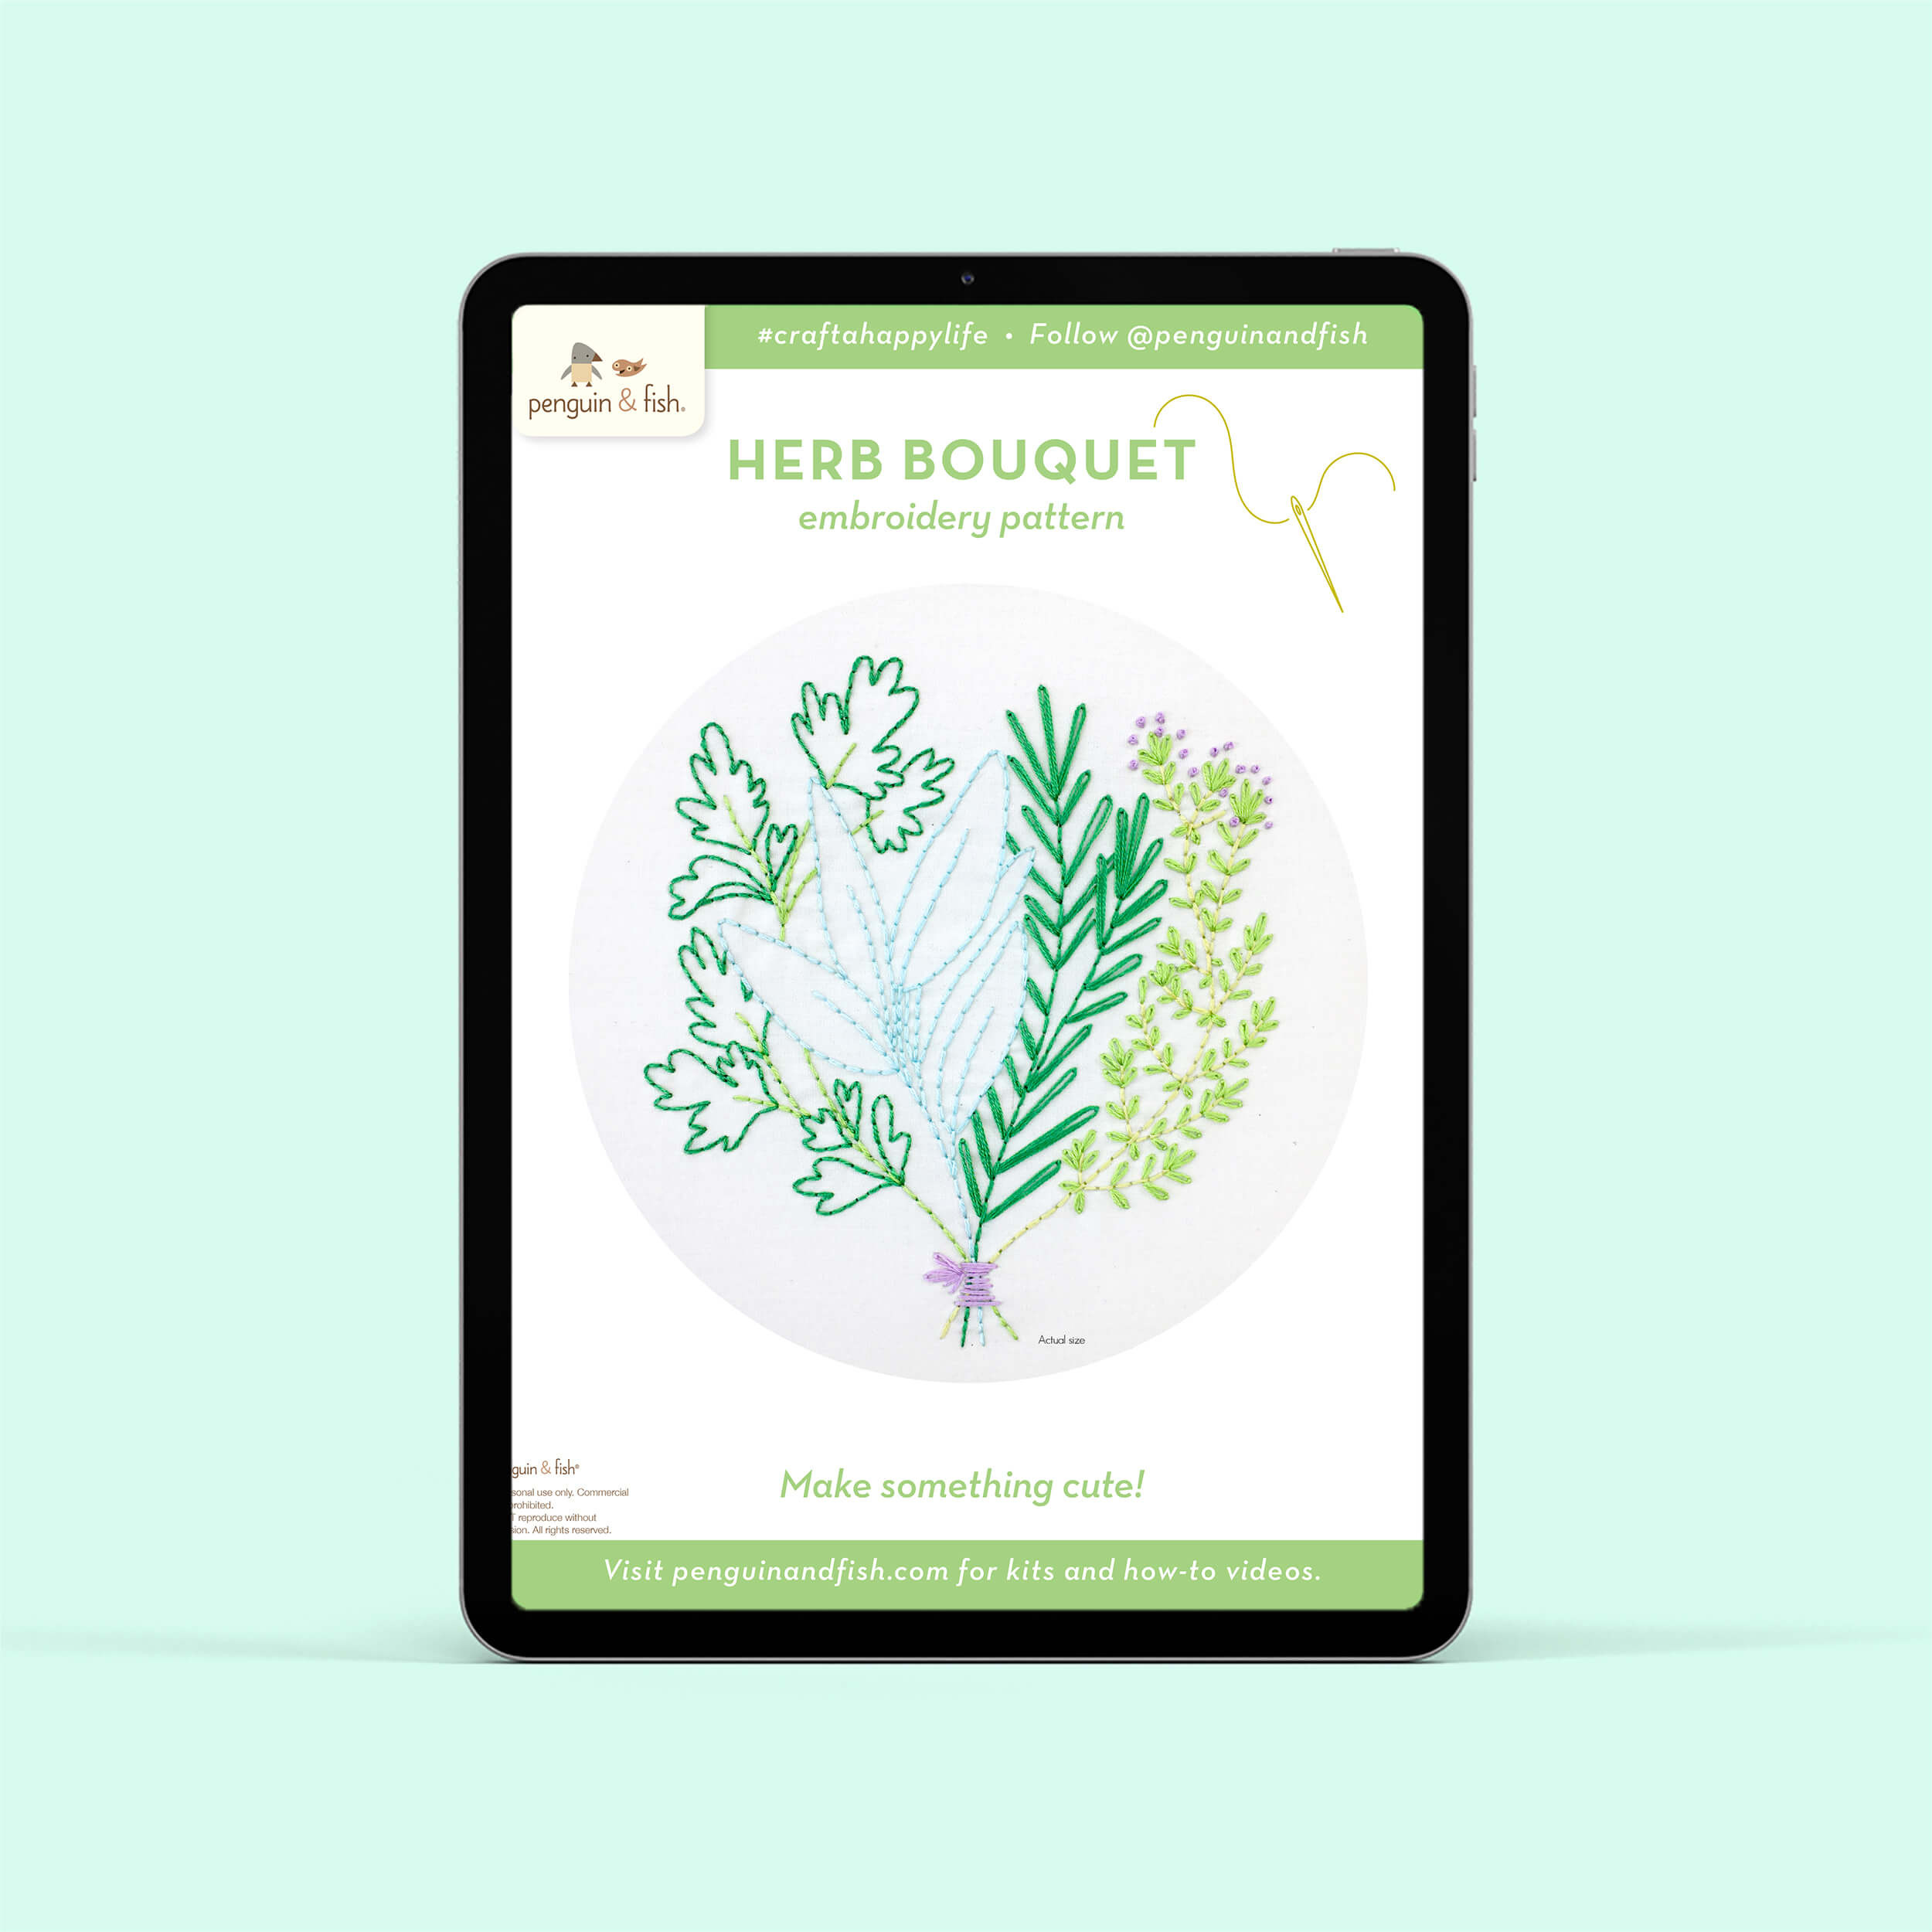 Herb Bouquet PDF embroidery pattern shown on a tablet